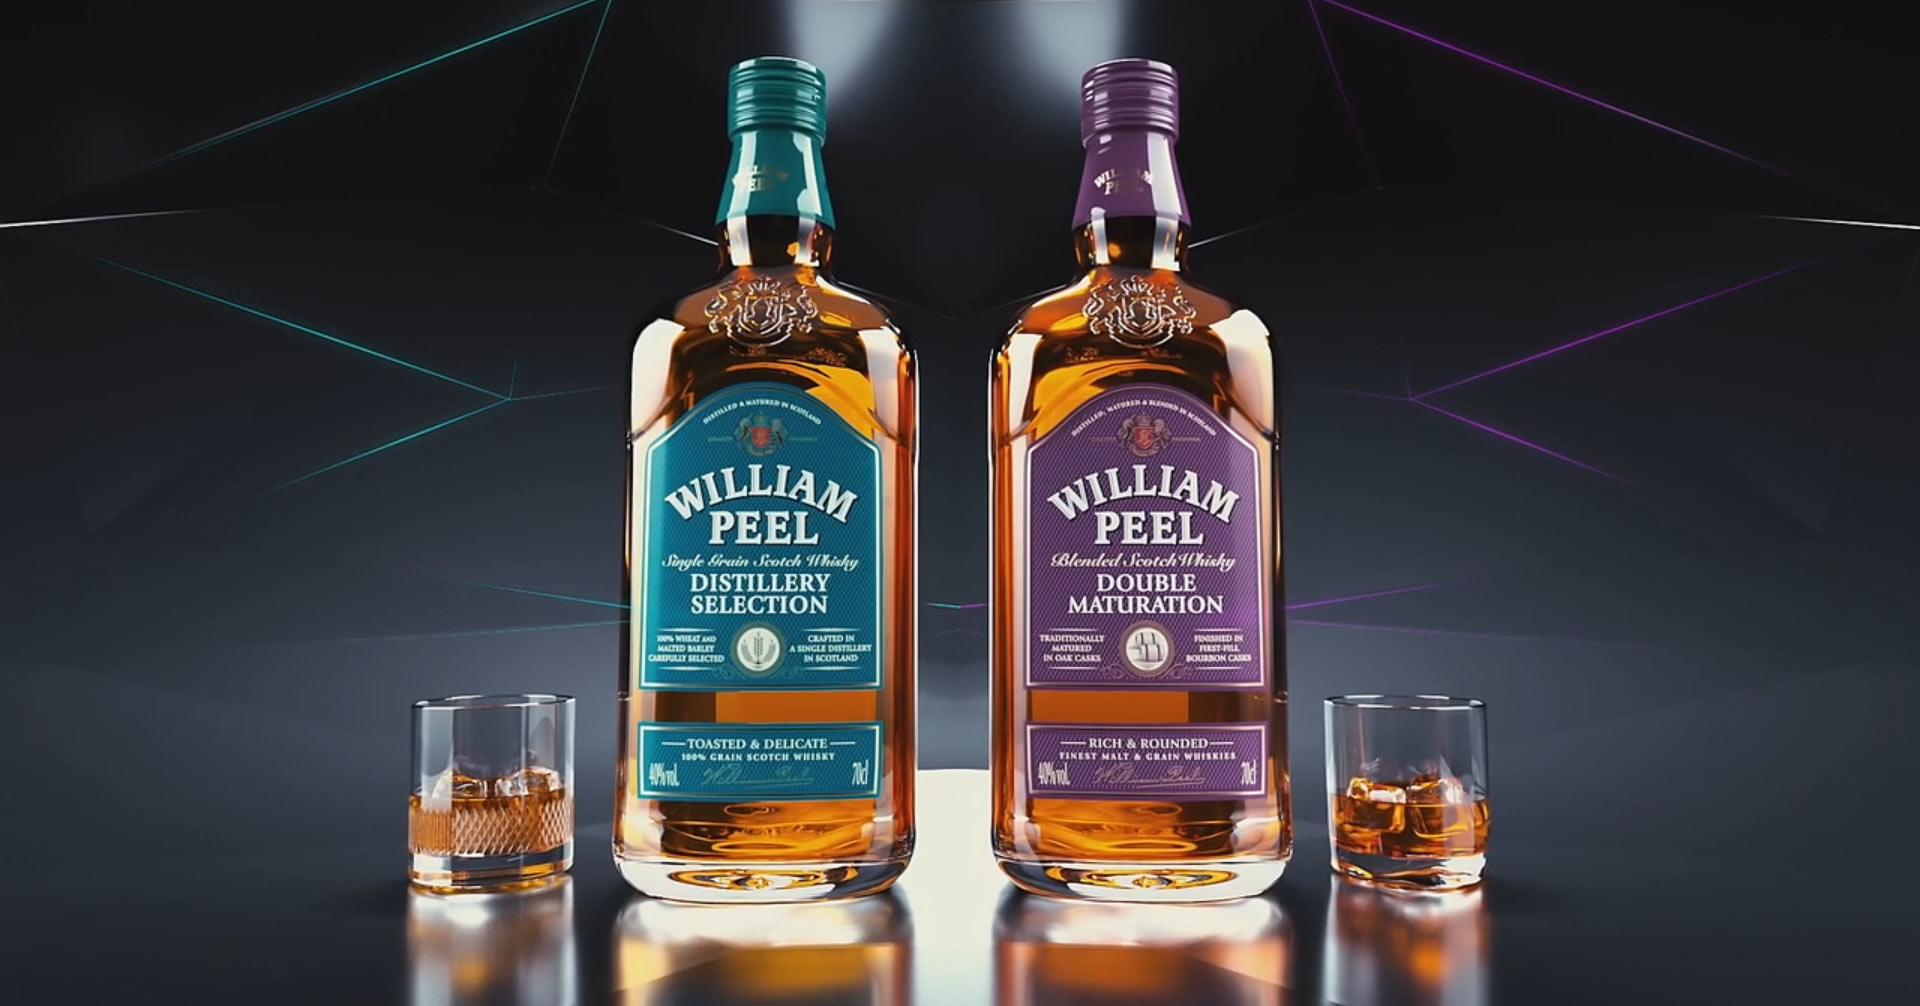 william-peel-double-maturation-and-distillery-collection